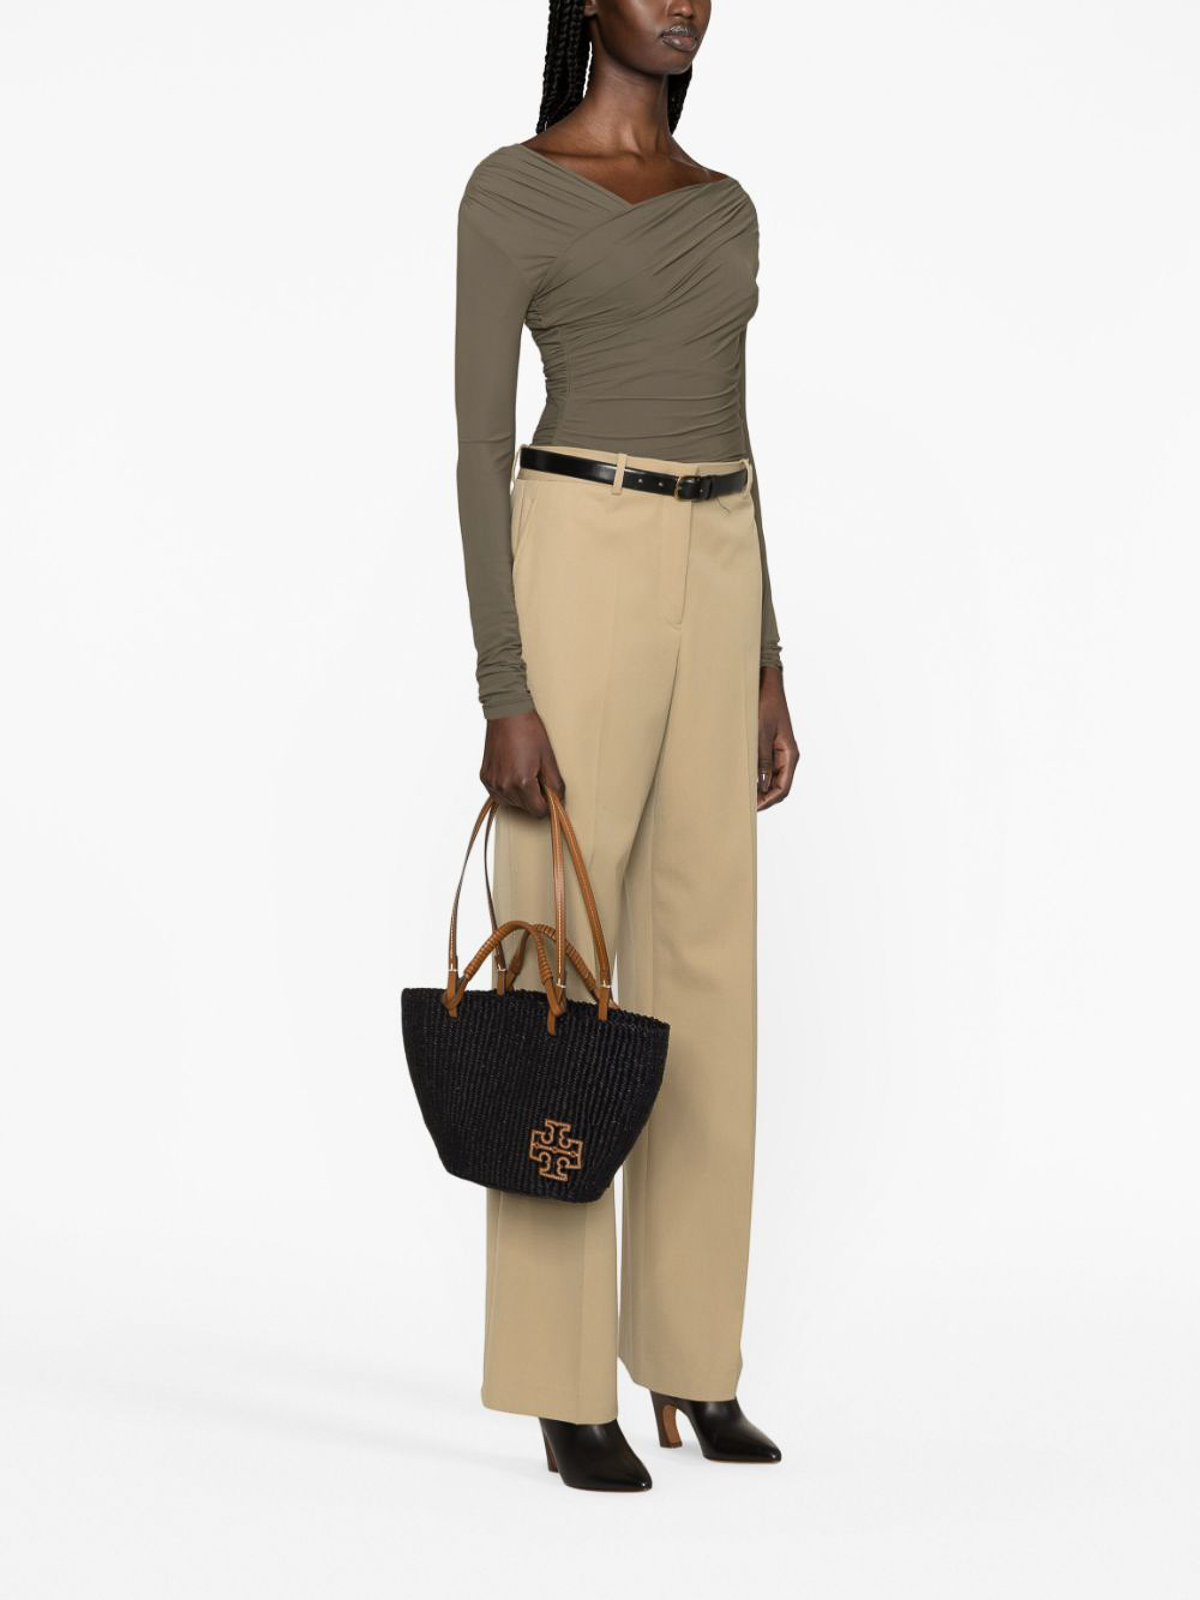 Shop Tory Burch Eleanor Small Straw Basket Tote In Black